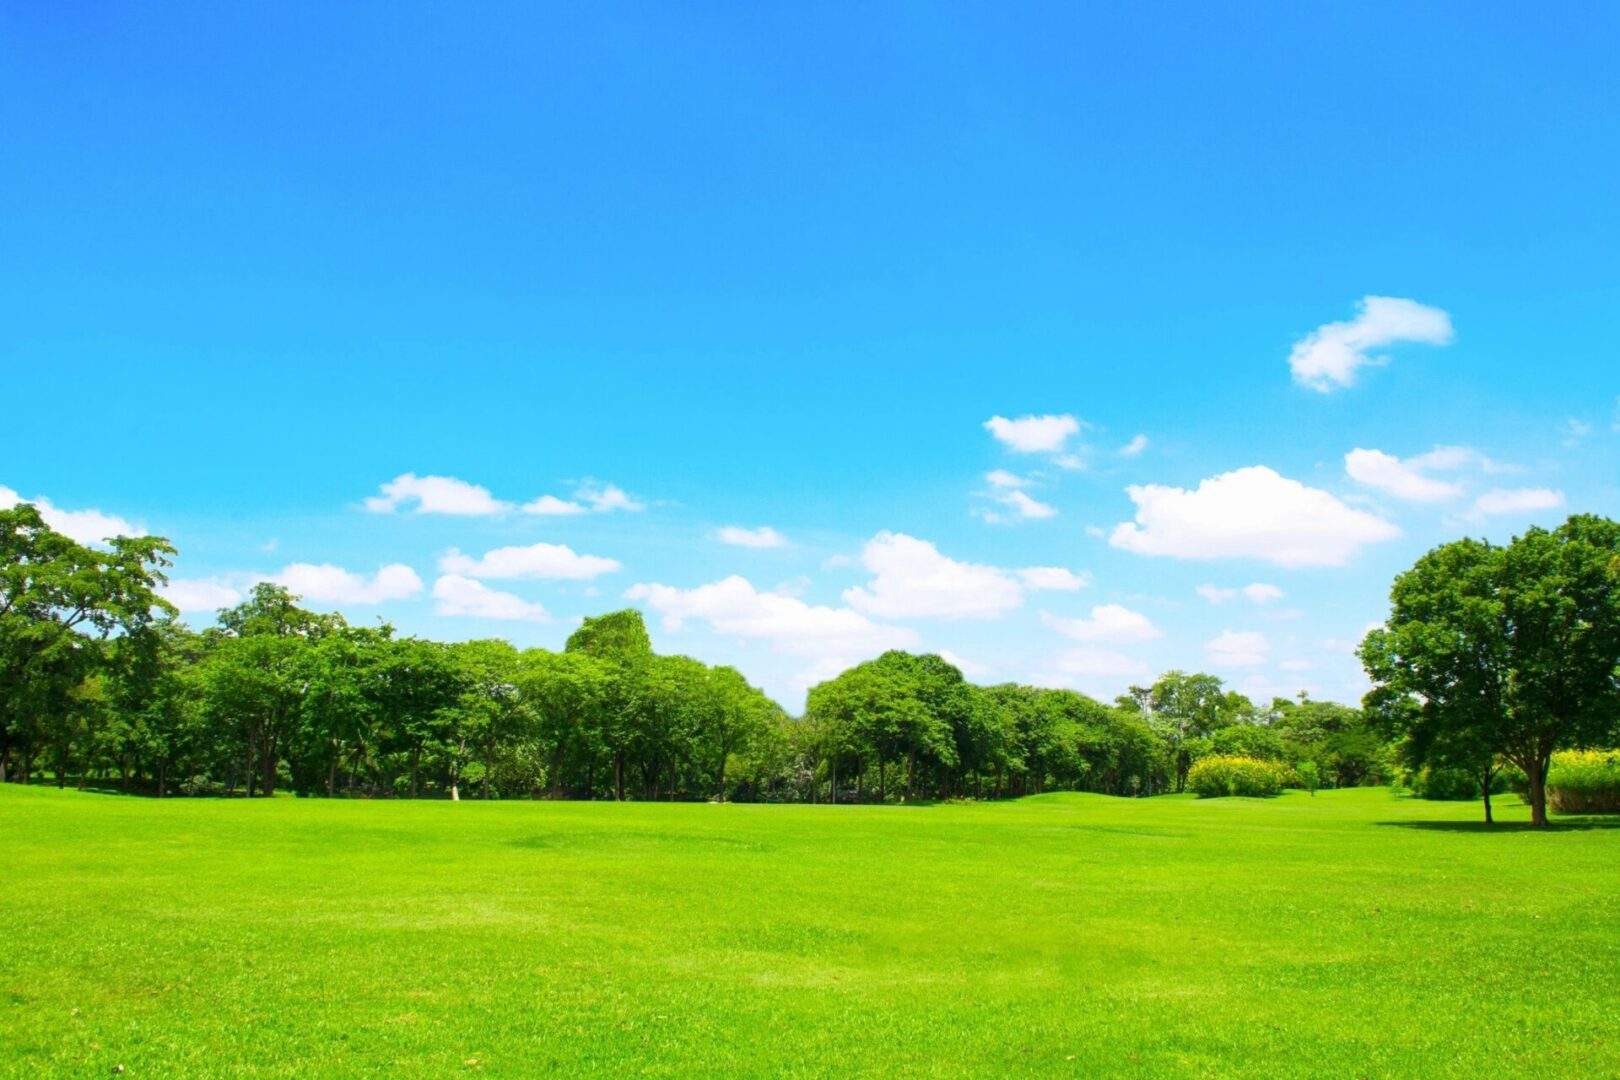 A field with trees and blue sky in the background.